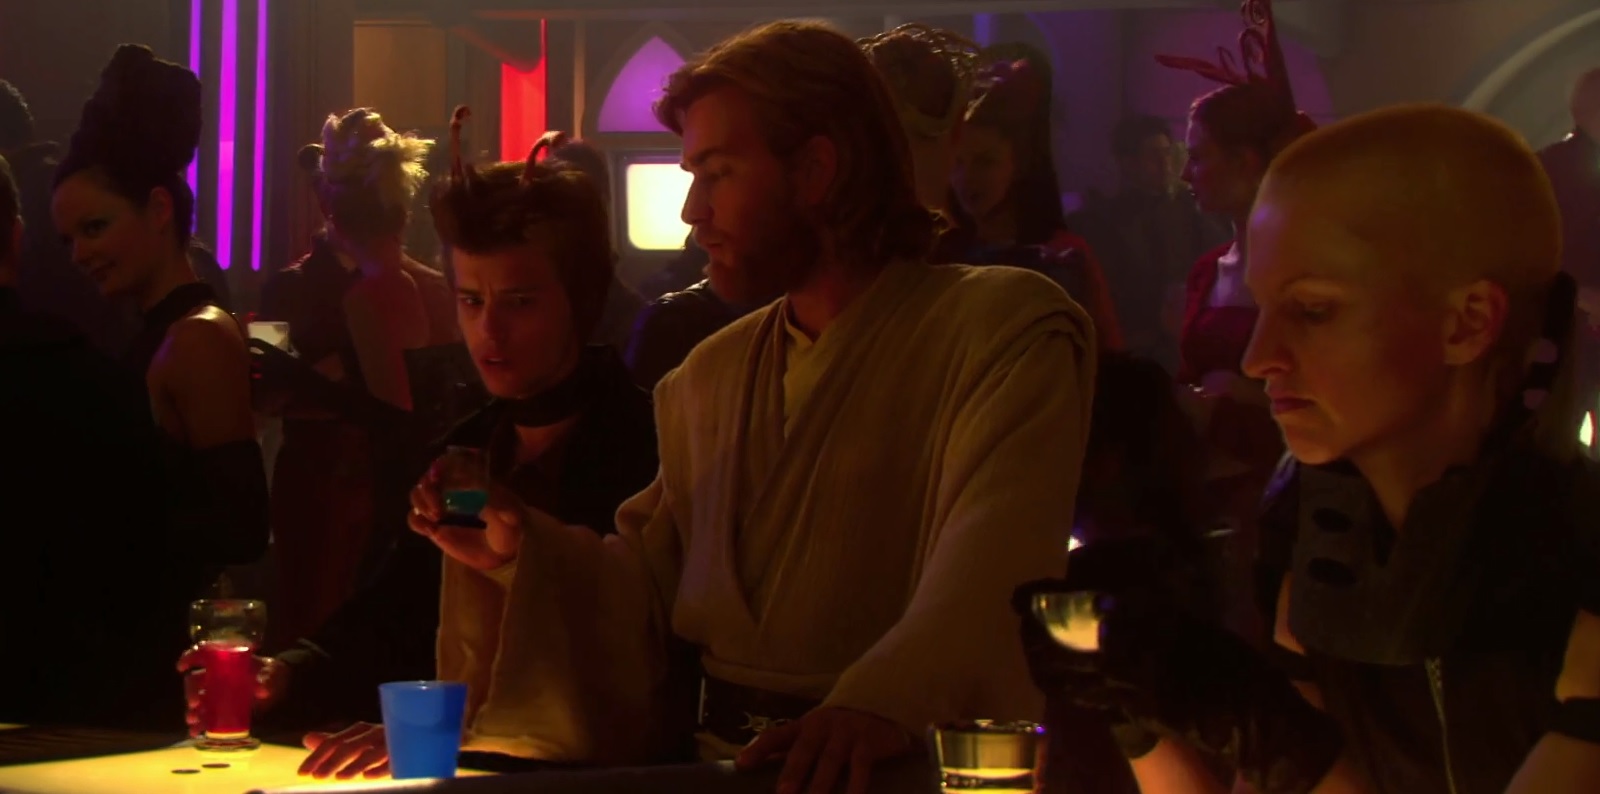 A Trip to Mos Eisley: Top 5 STAR WARS Characters I'd Have a Drink